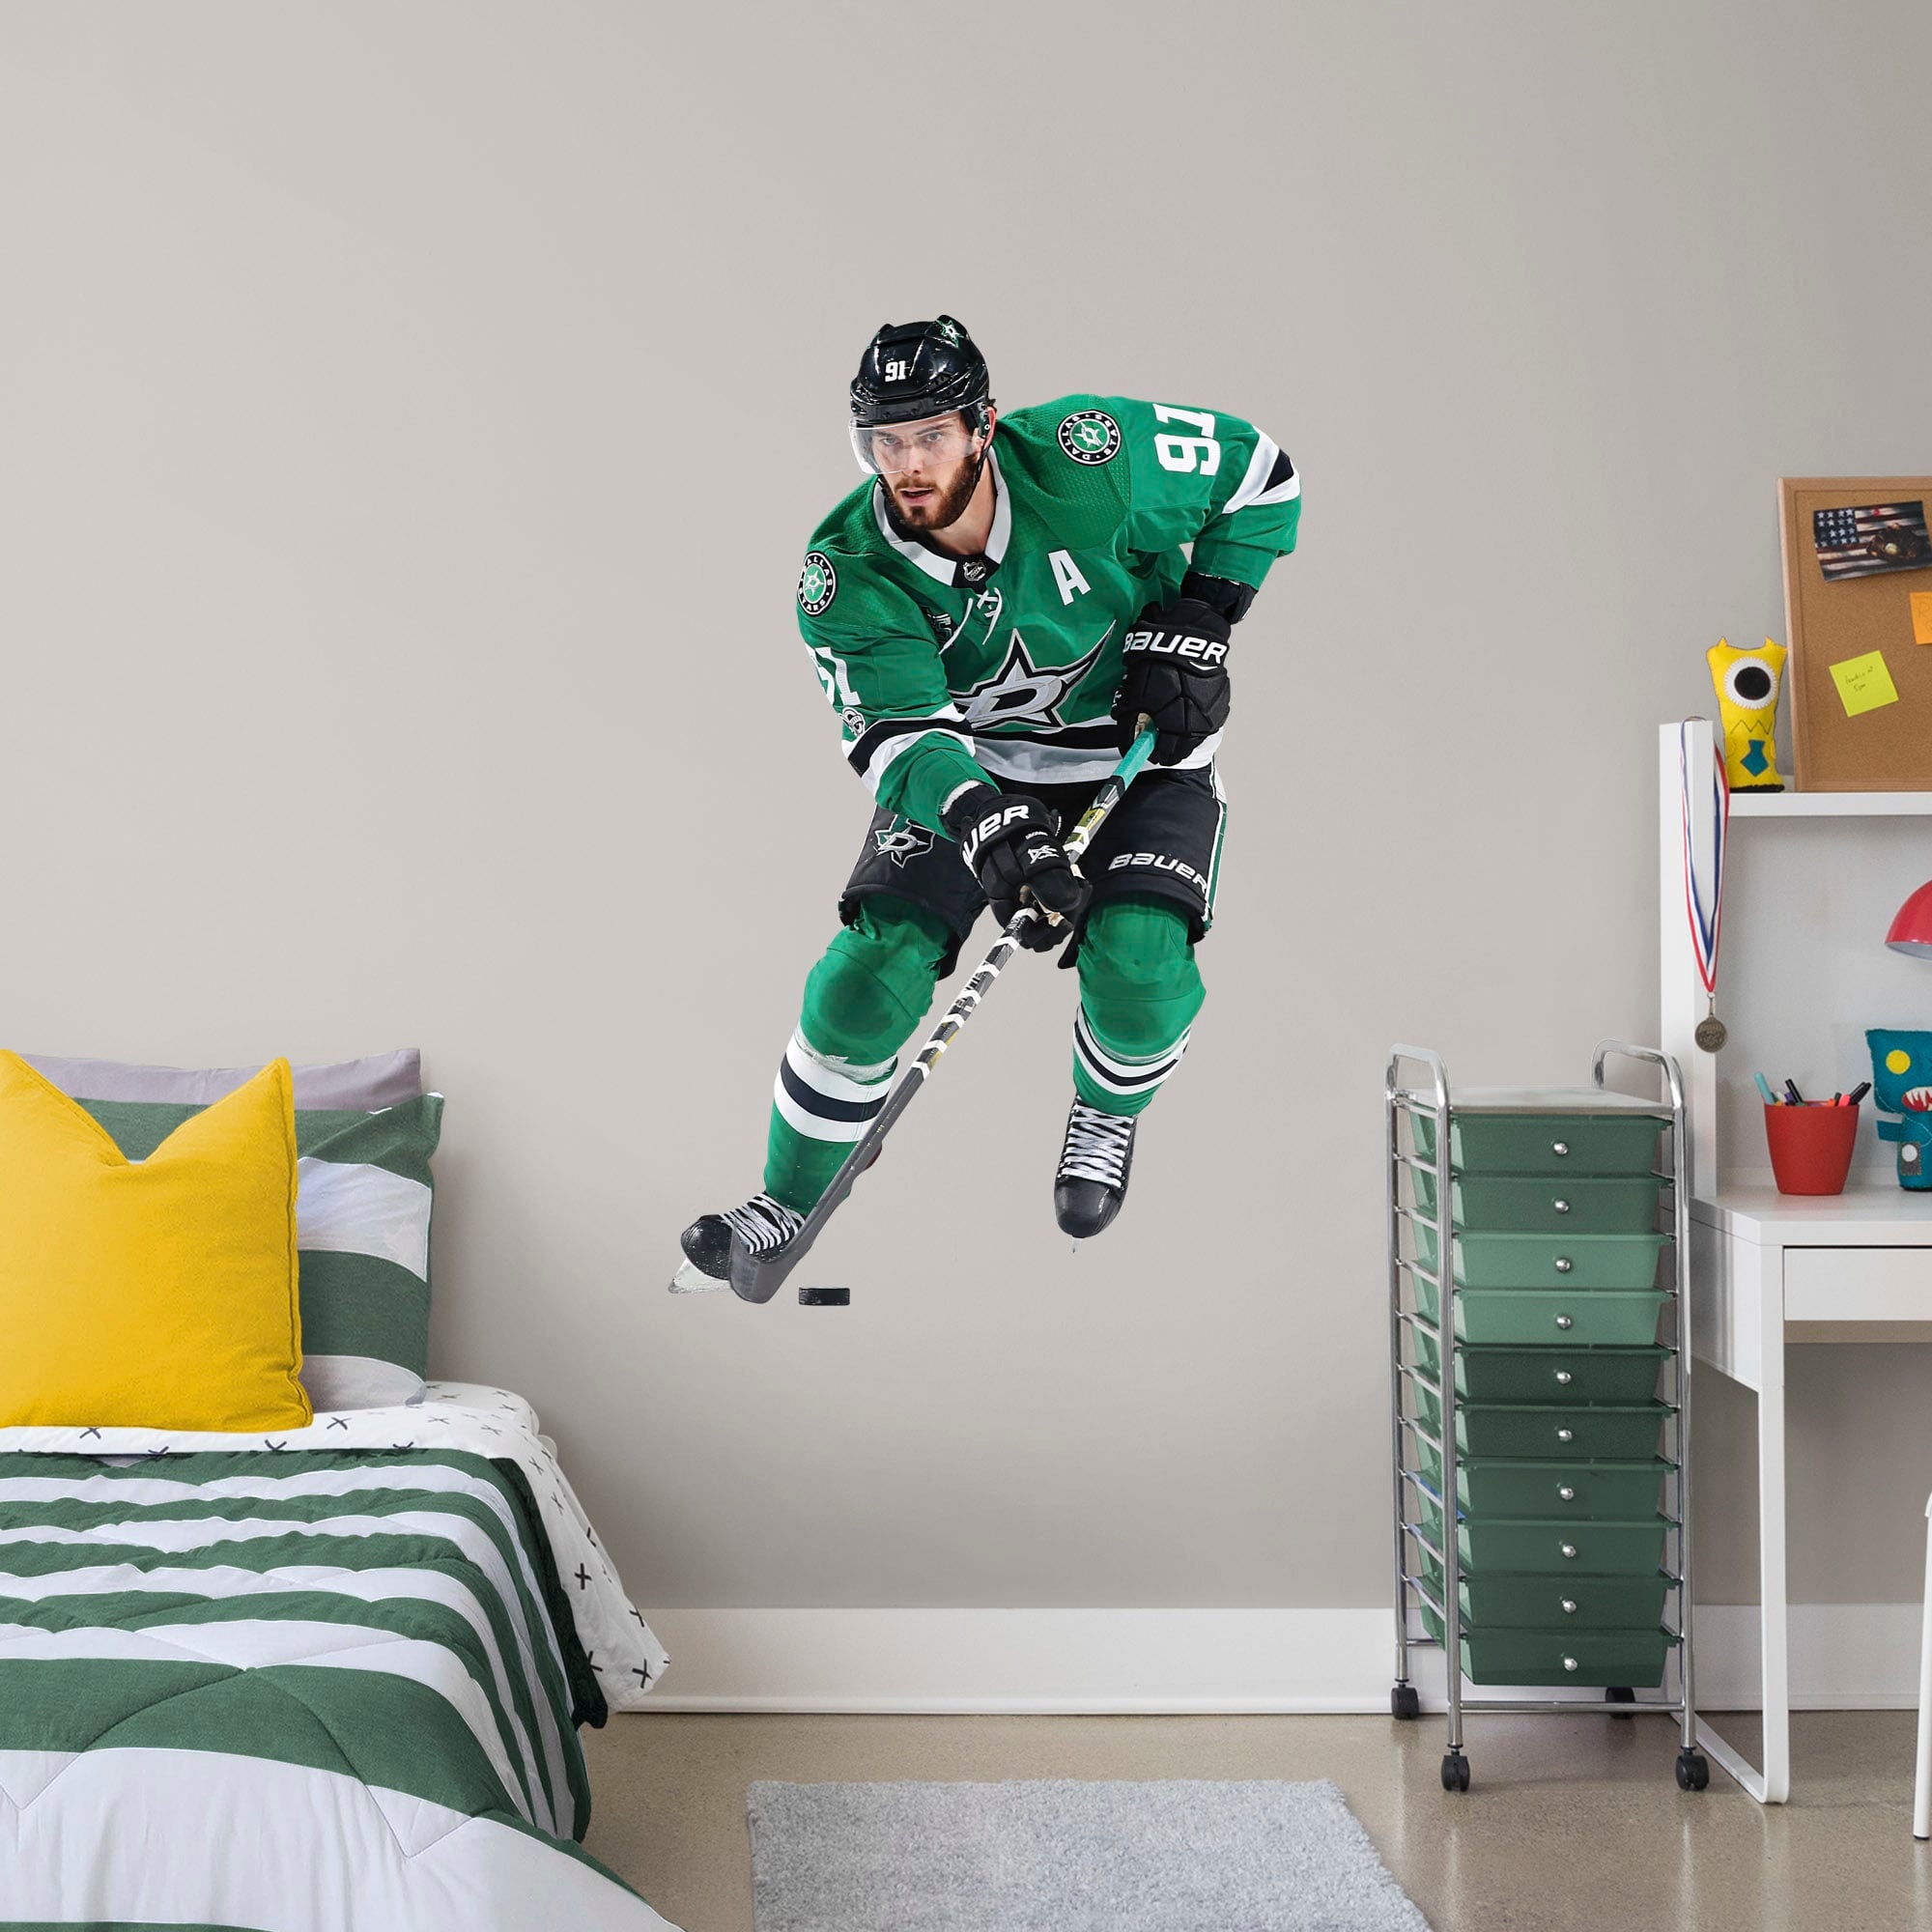 Tyler Seguin for Dallas Stars - Officially Licensed NHL Removable Wall Decal Giant Athlete + 2 Decals (33"W x 51"H) by Fathead |